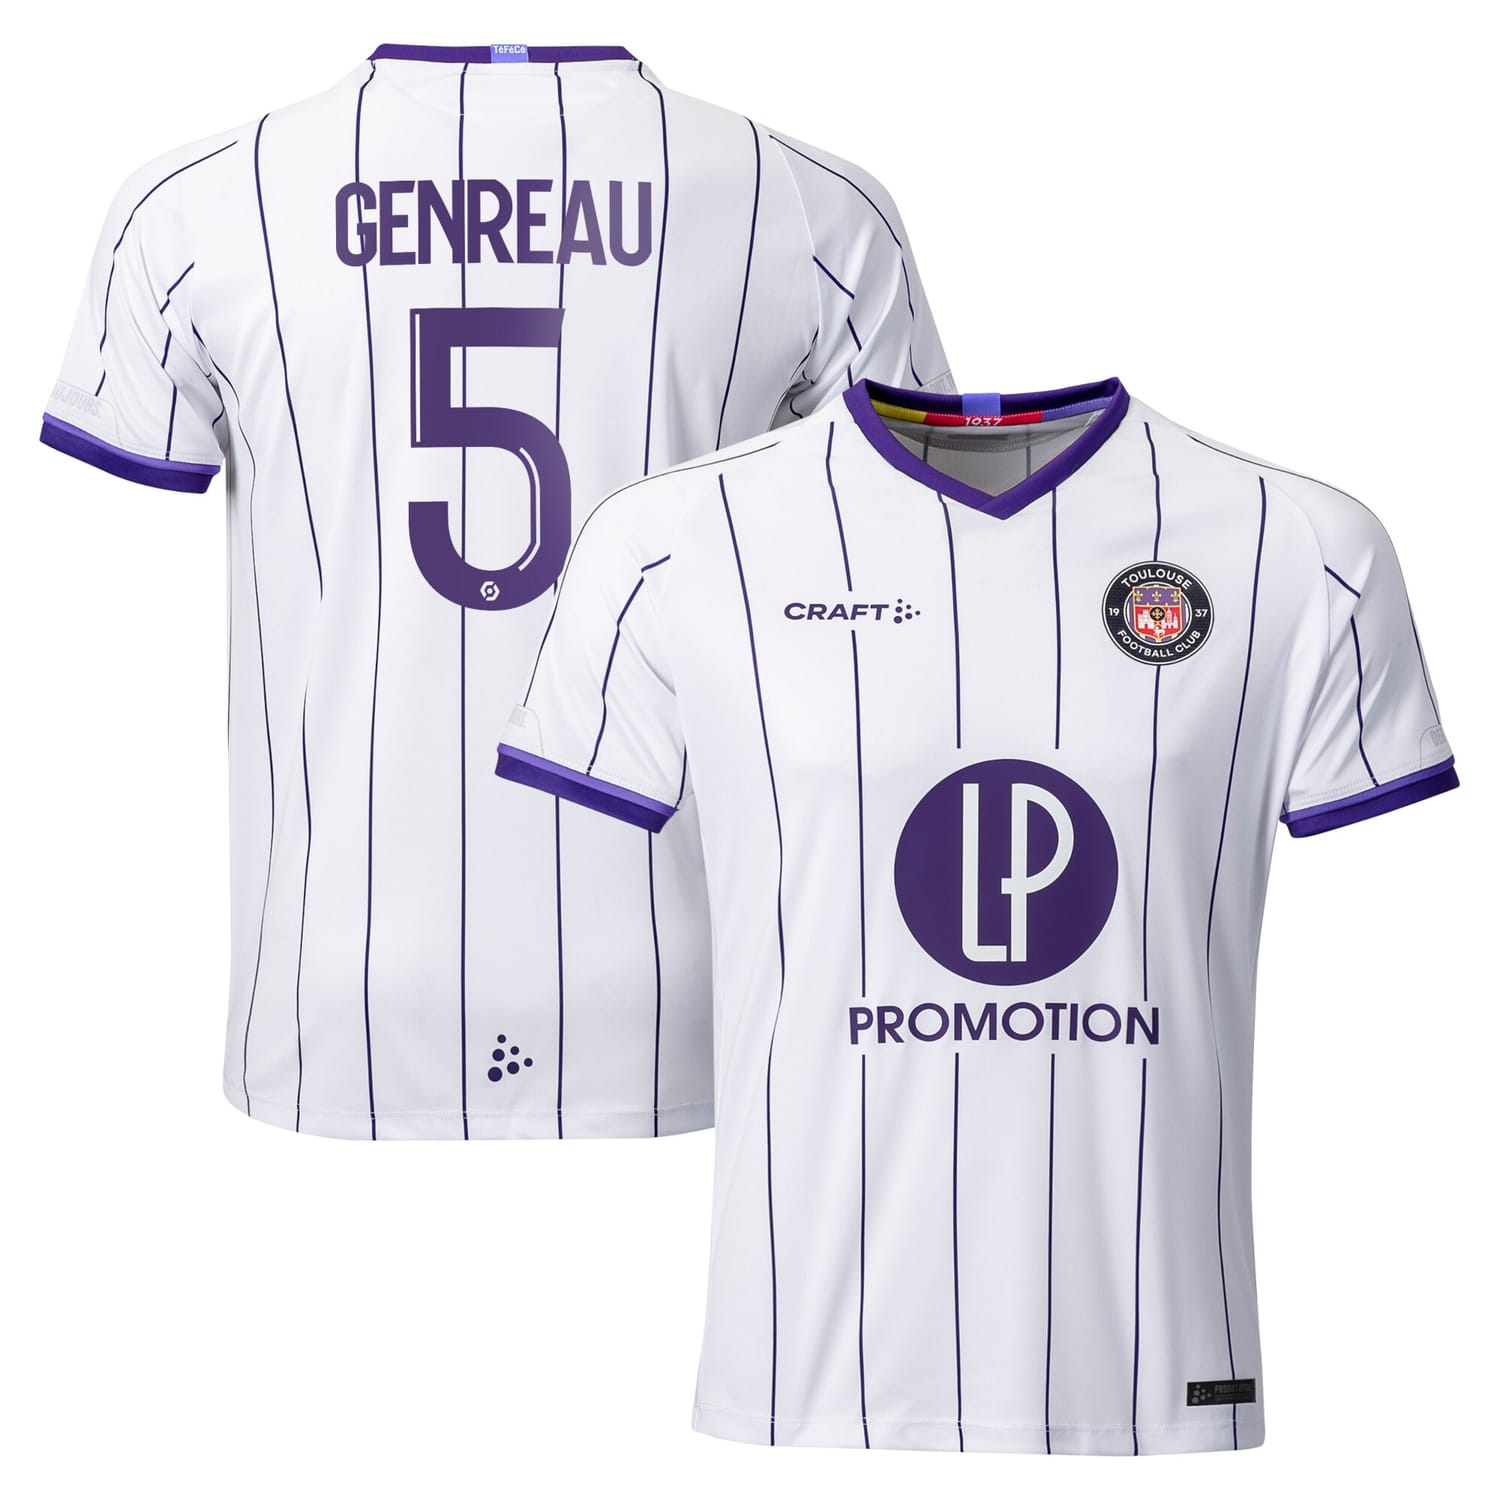 Ligue 1 Toulouse Home Jersey Shirt 2022-23 player Denis Genreau 5 printing for Men